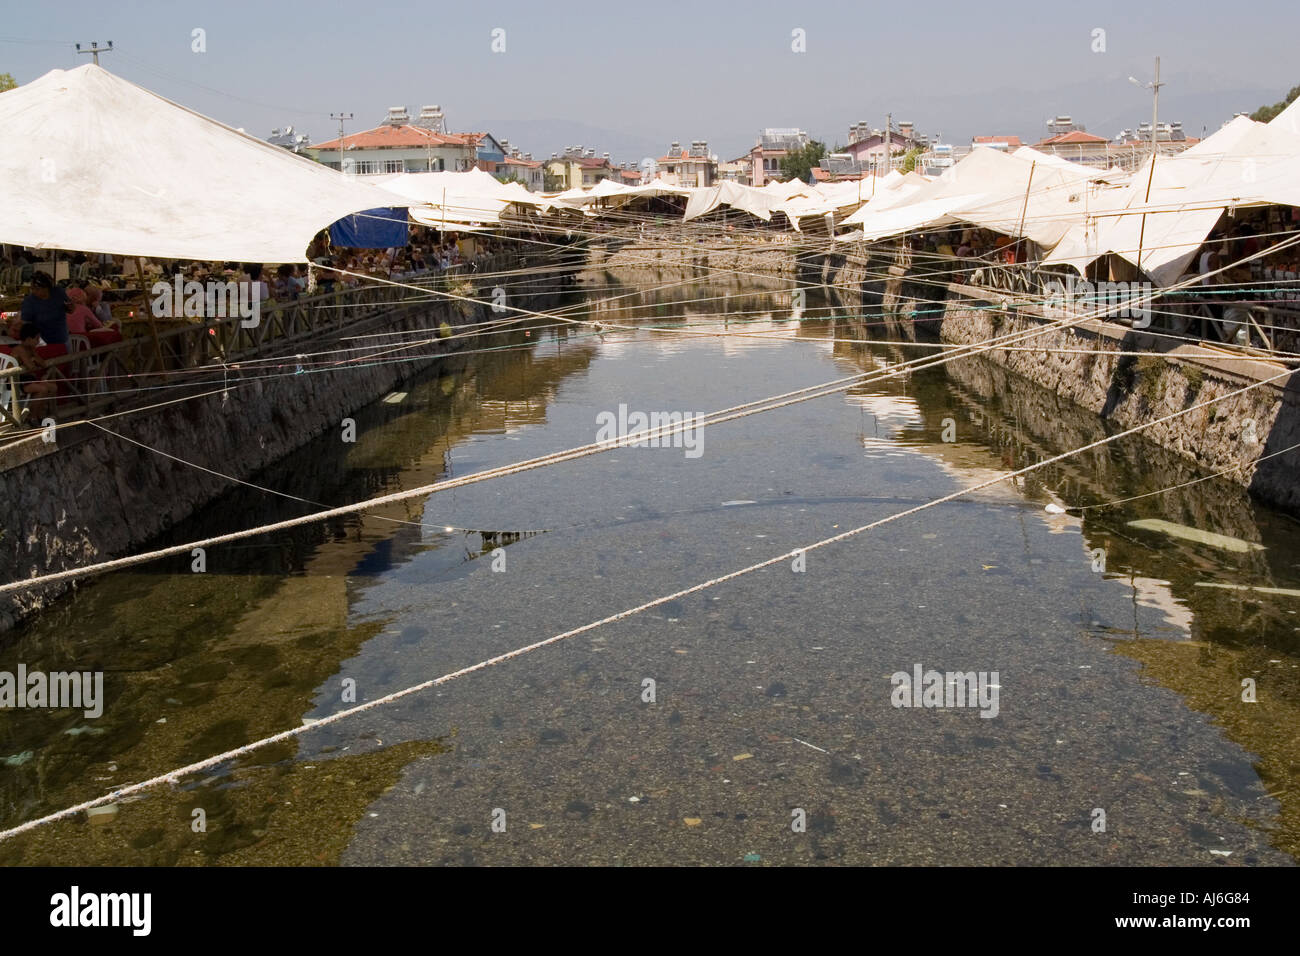 The traditional tented market at Fethiye Turkey the tents reflected in the canal  Stock Photo